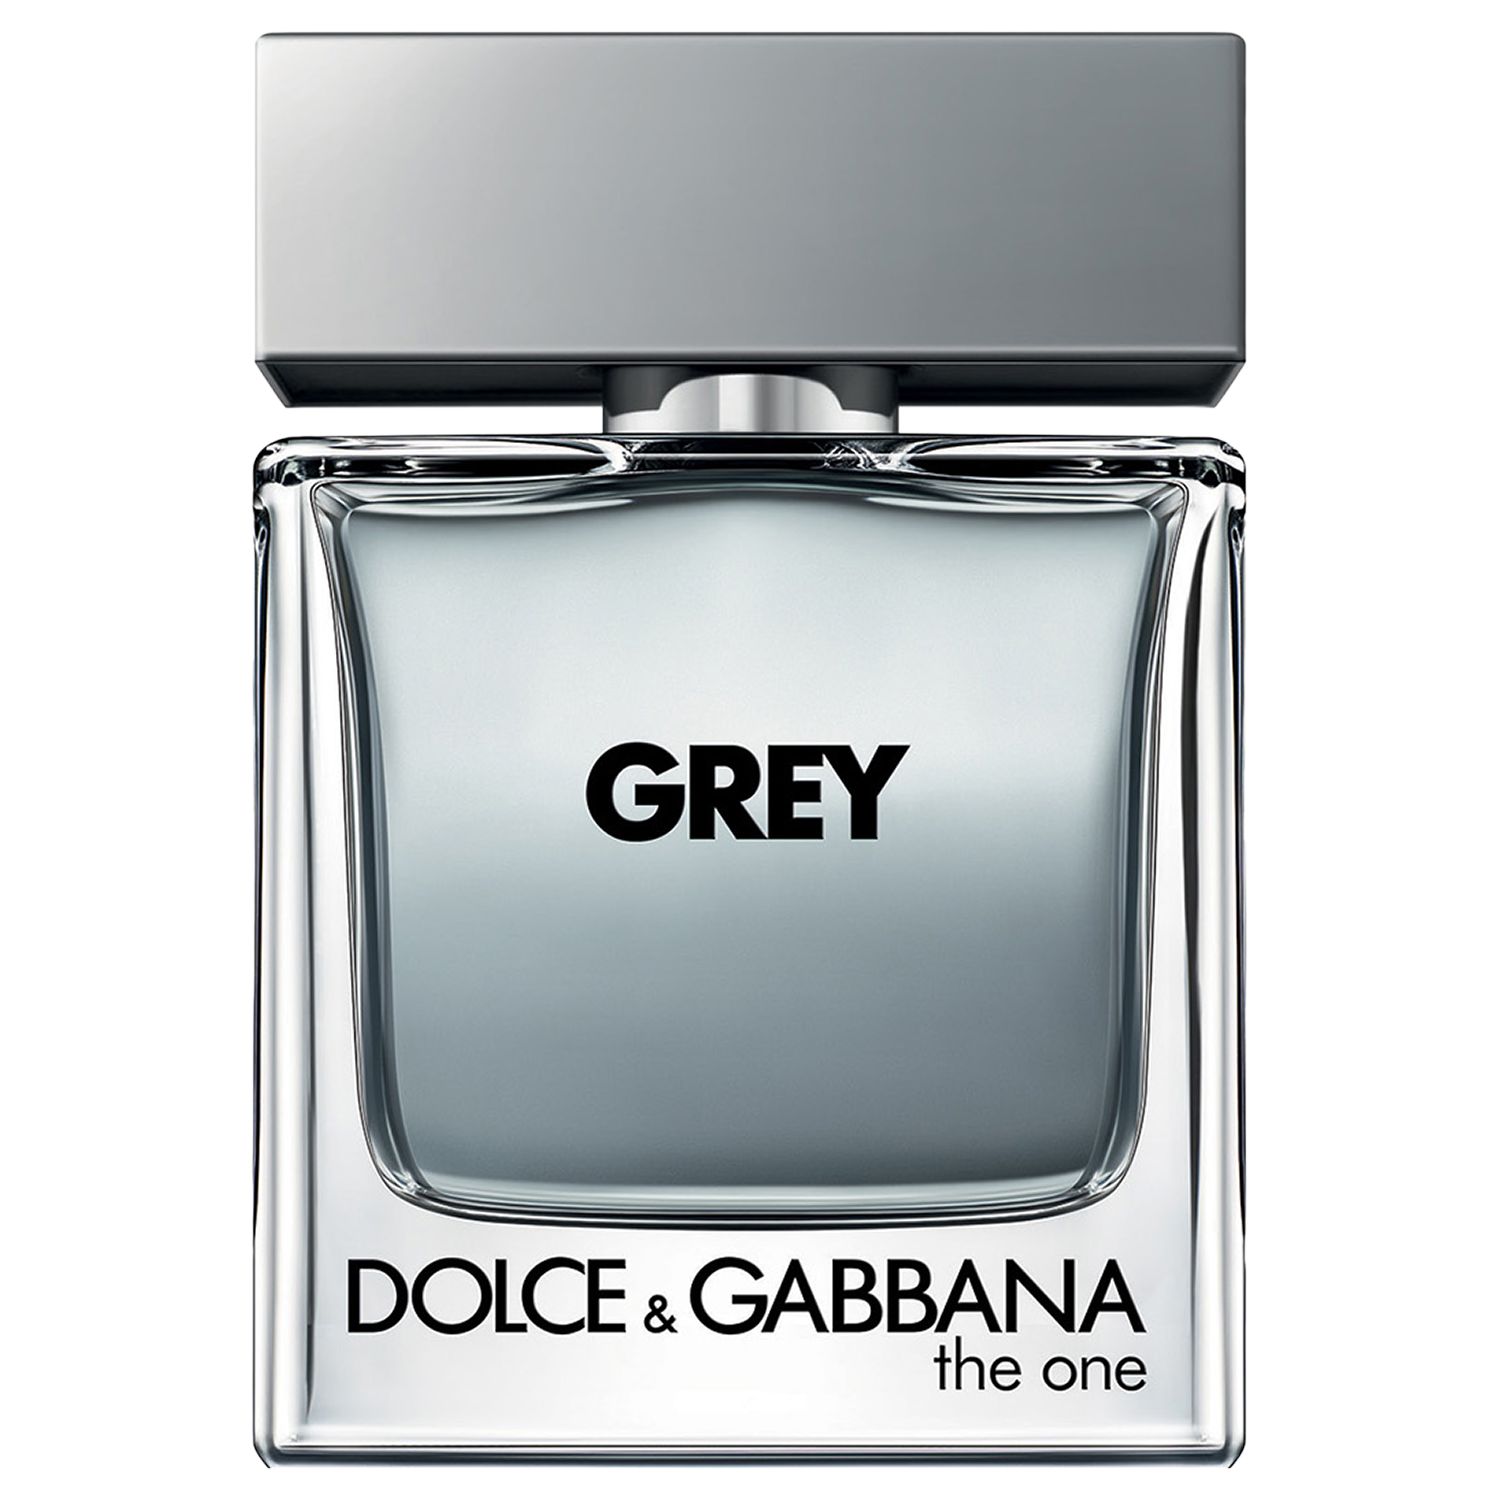 dolce and gabbana grey reviews